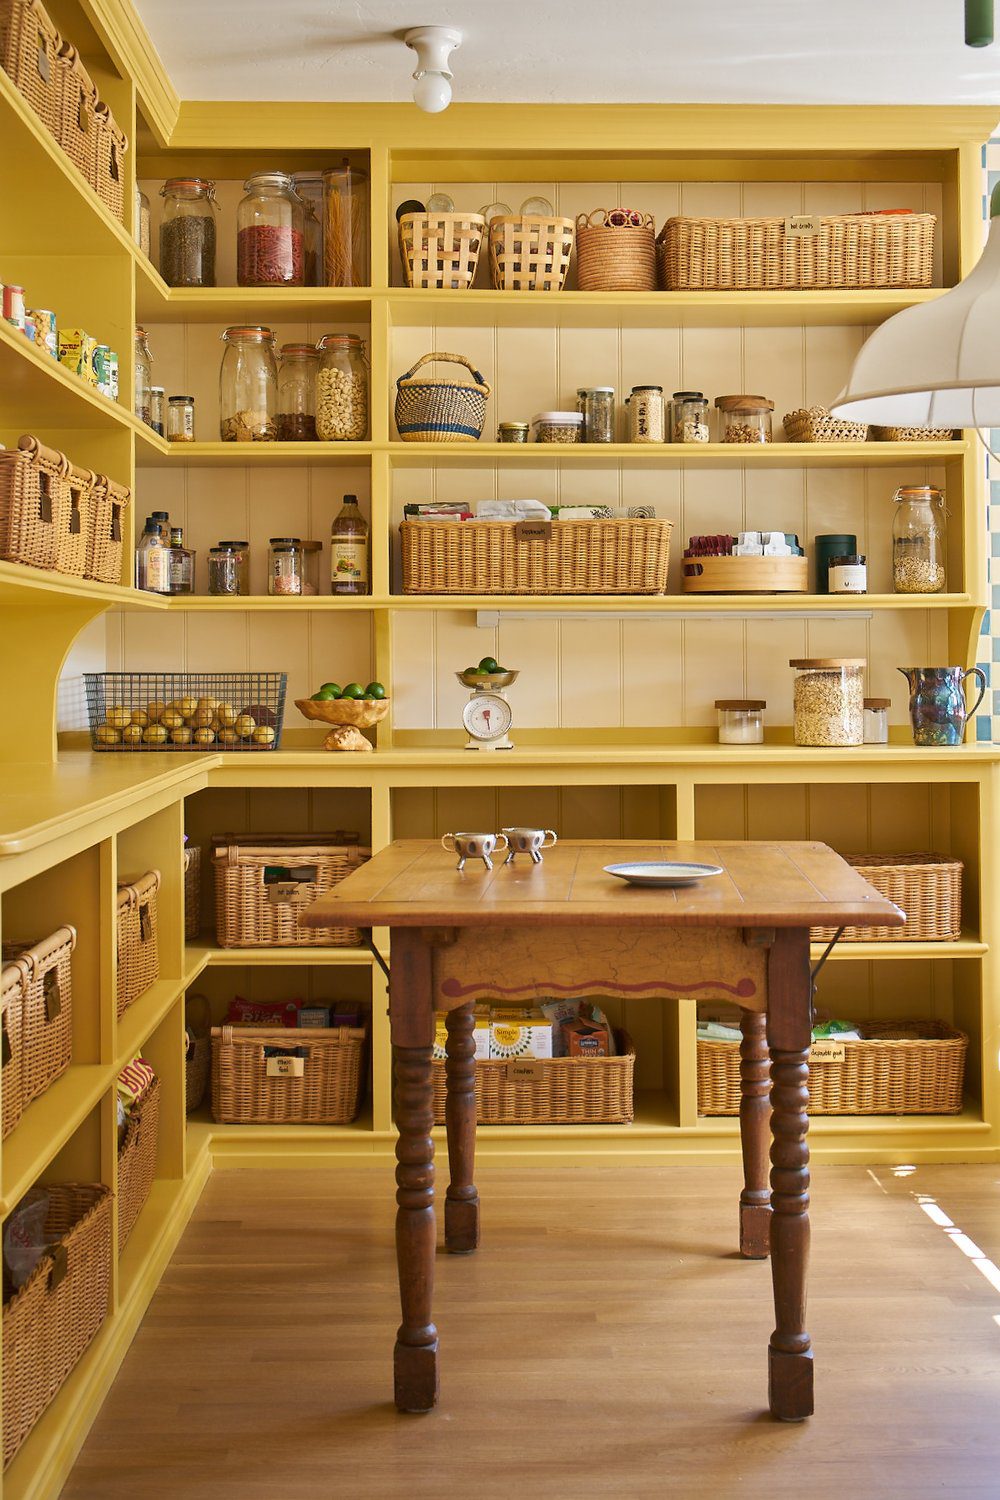 Kitchen and Pantry Design: 3 Things I Love About This Project